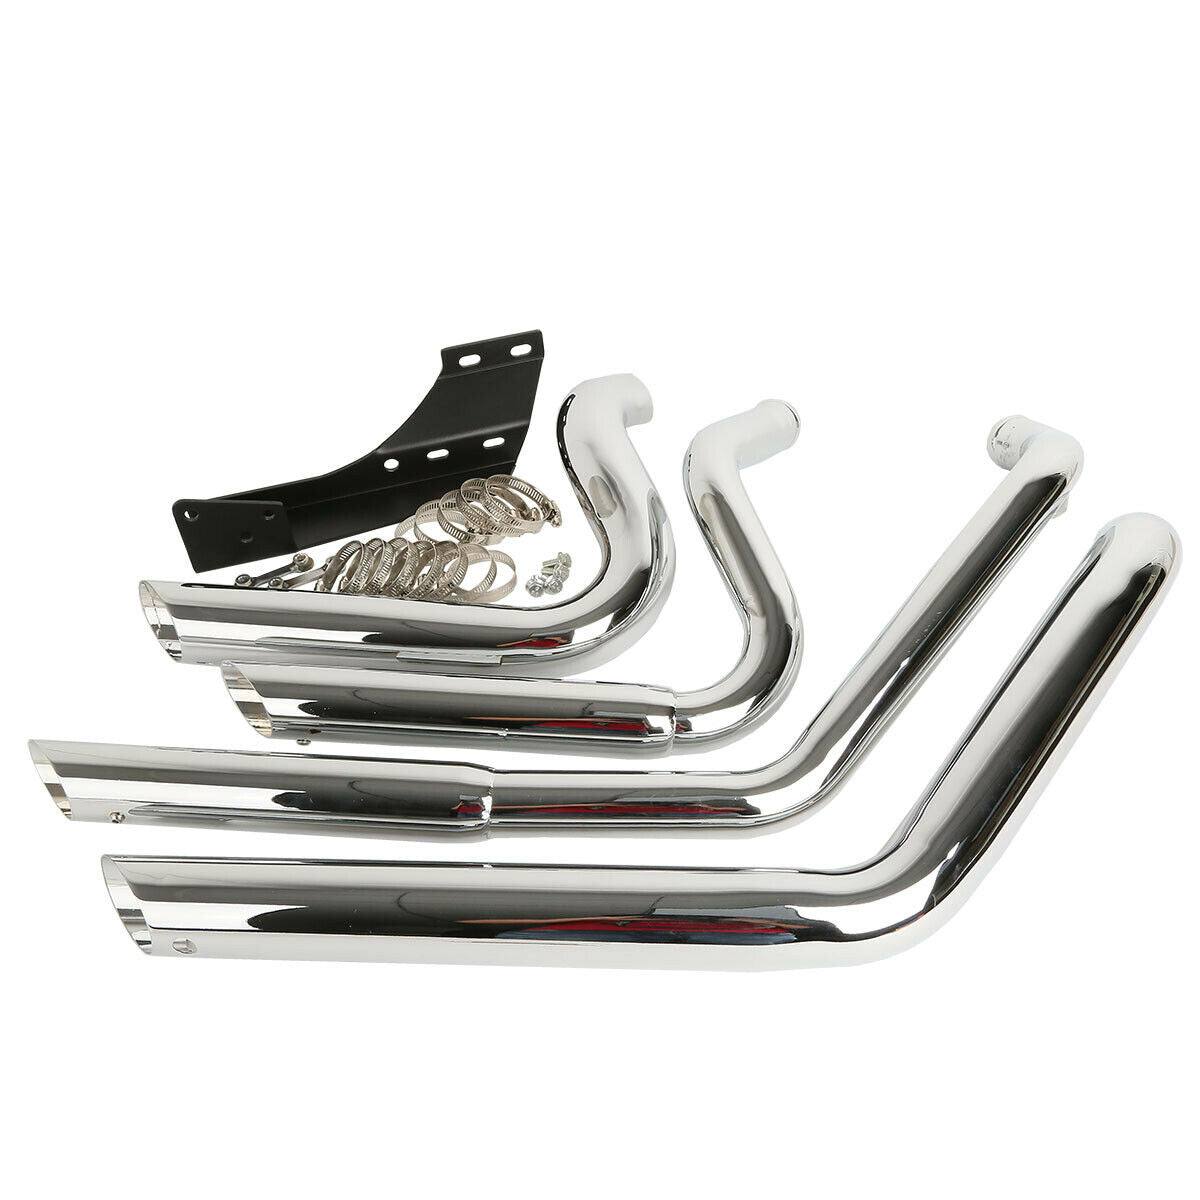 Staggered Shortshot Exhaust Pipes Fit For Harley Sportster XL 48 72 Custom 04-13 - Moto Life Products